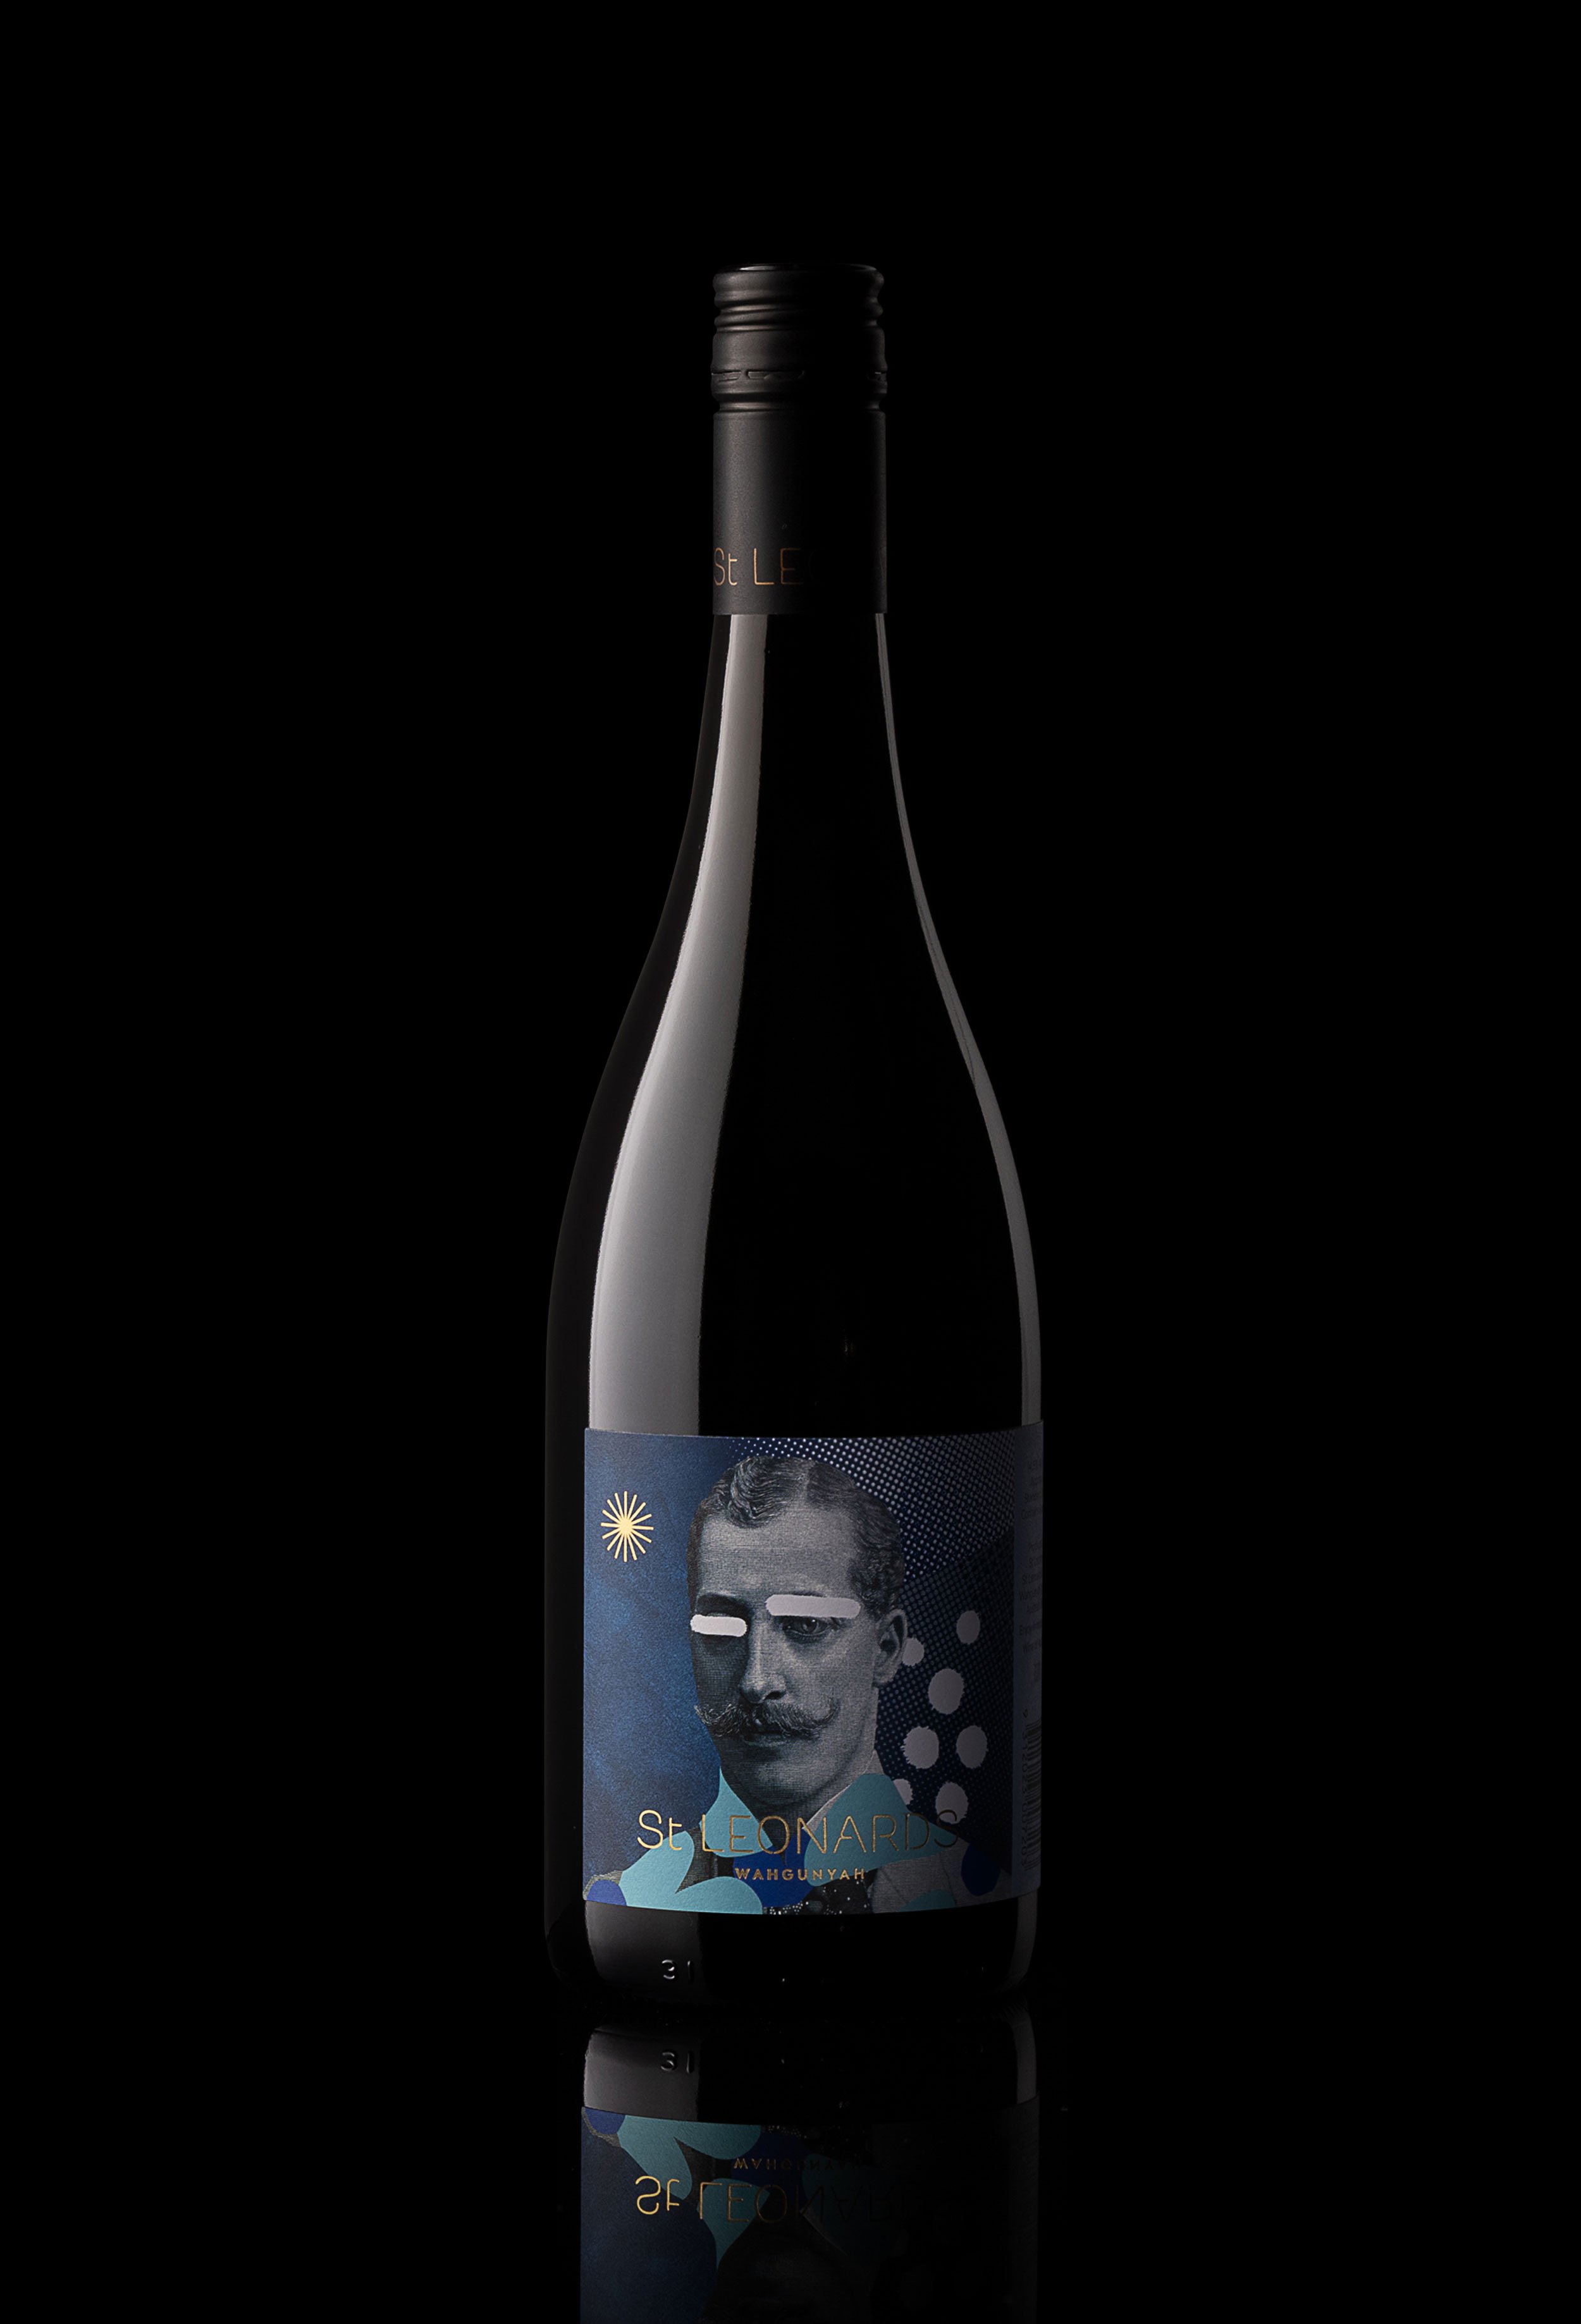 photograph taken by sarah anderson for Cloudy Co of St Leonards Vineyard wine bottle with blue label.jpg